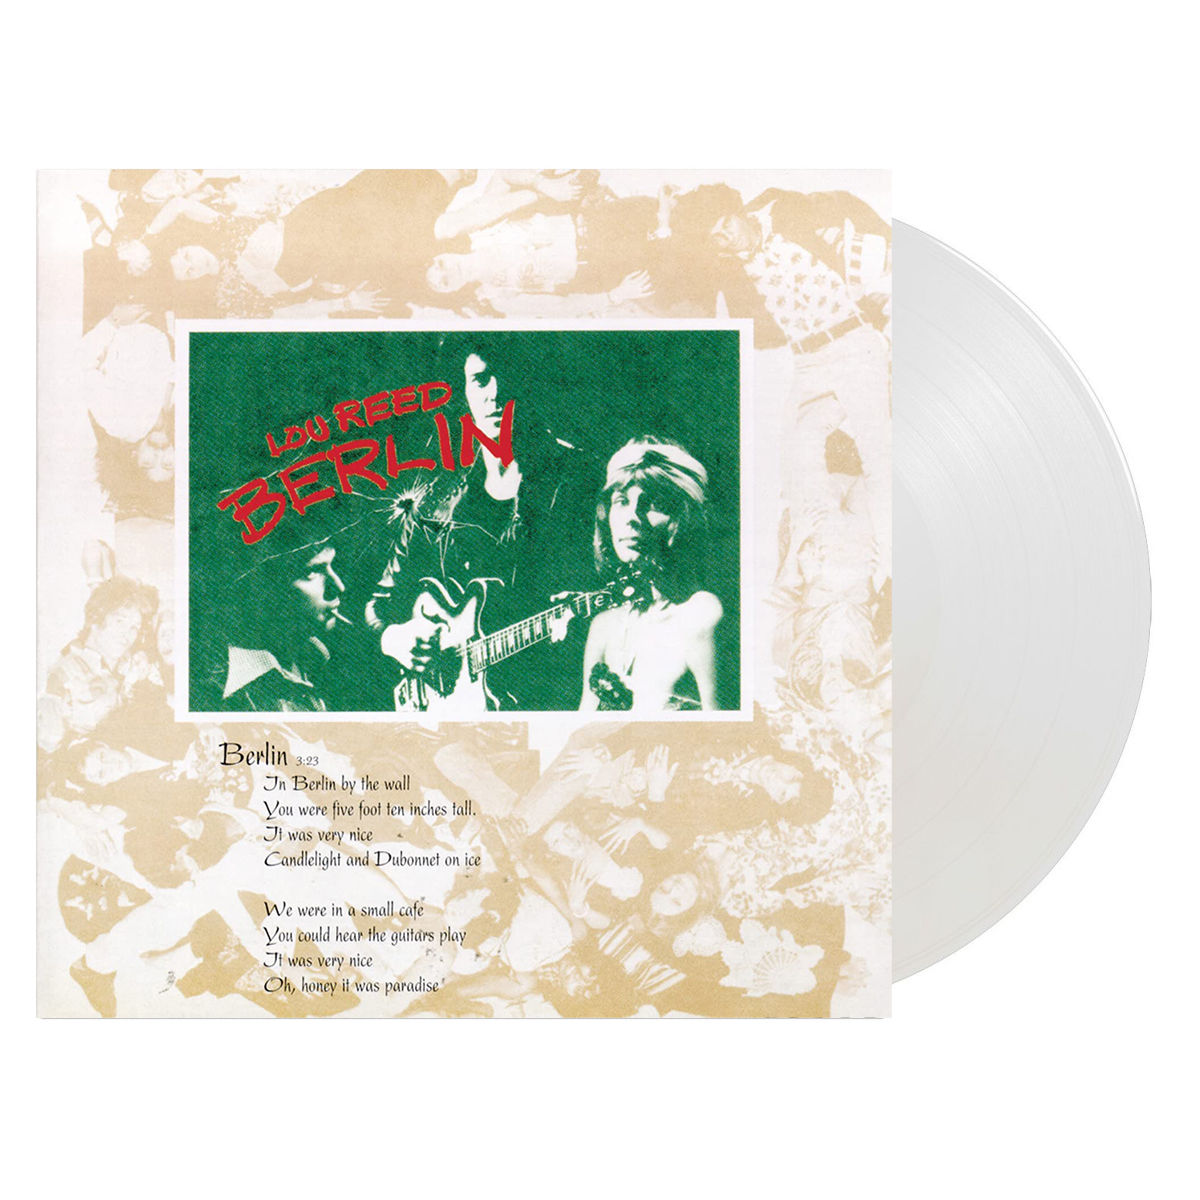 Lou Reed - Berlin: Limited Edition White Vinyl LP